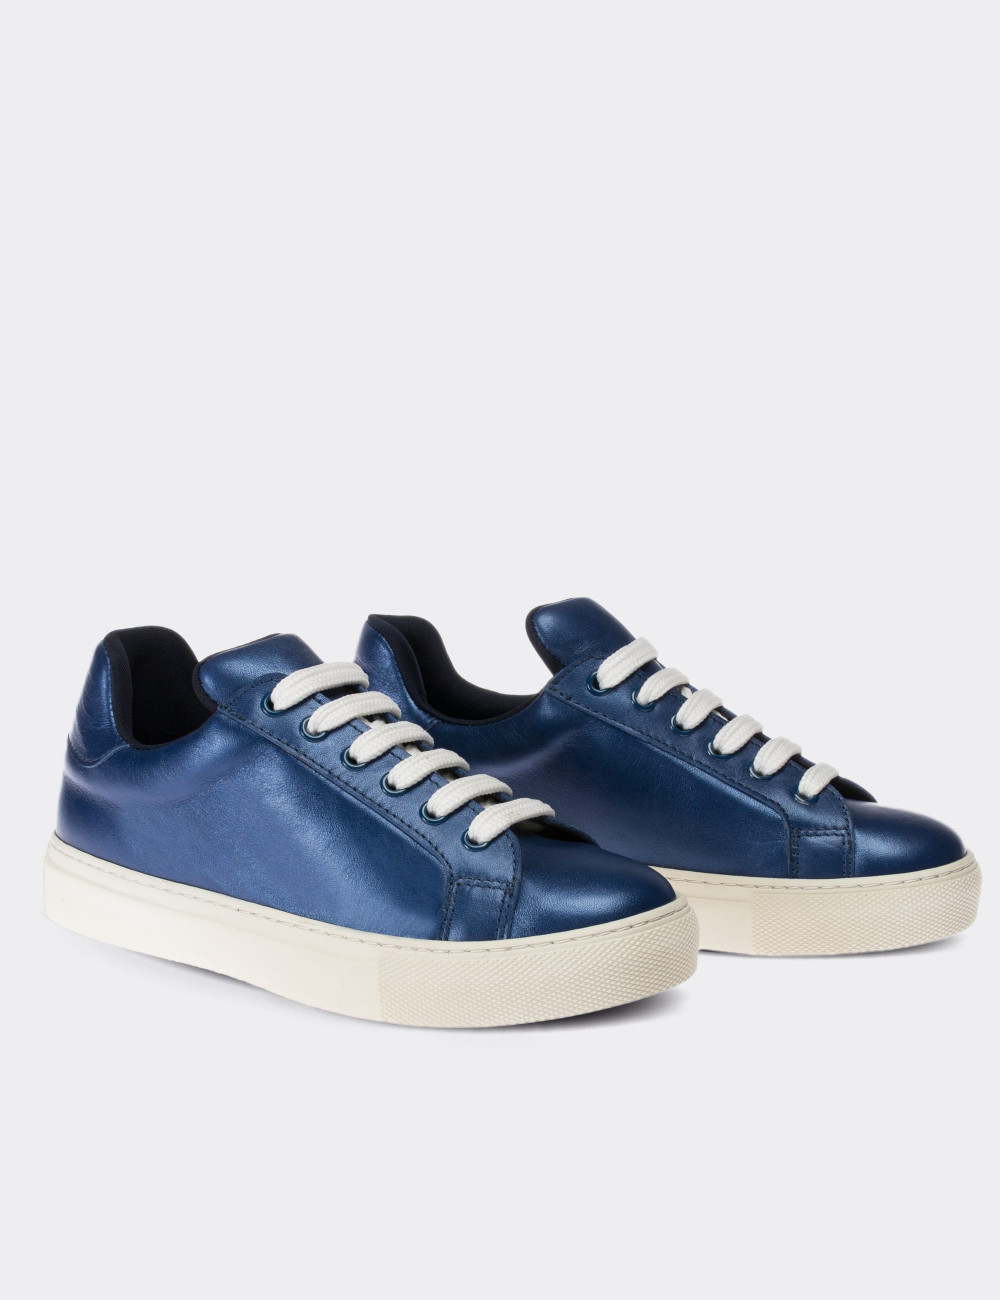 Blue  Leather Sneakers - 01698ZMVIC01